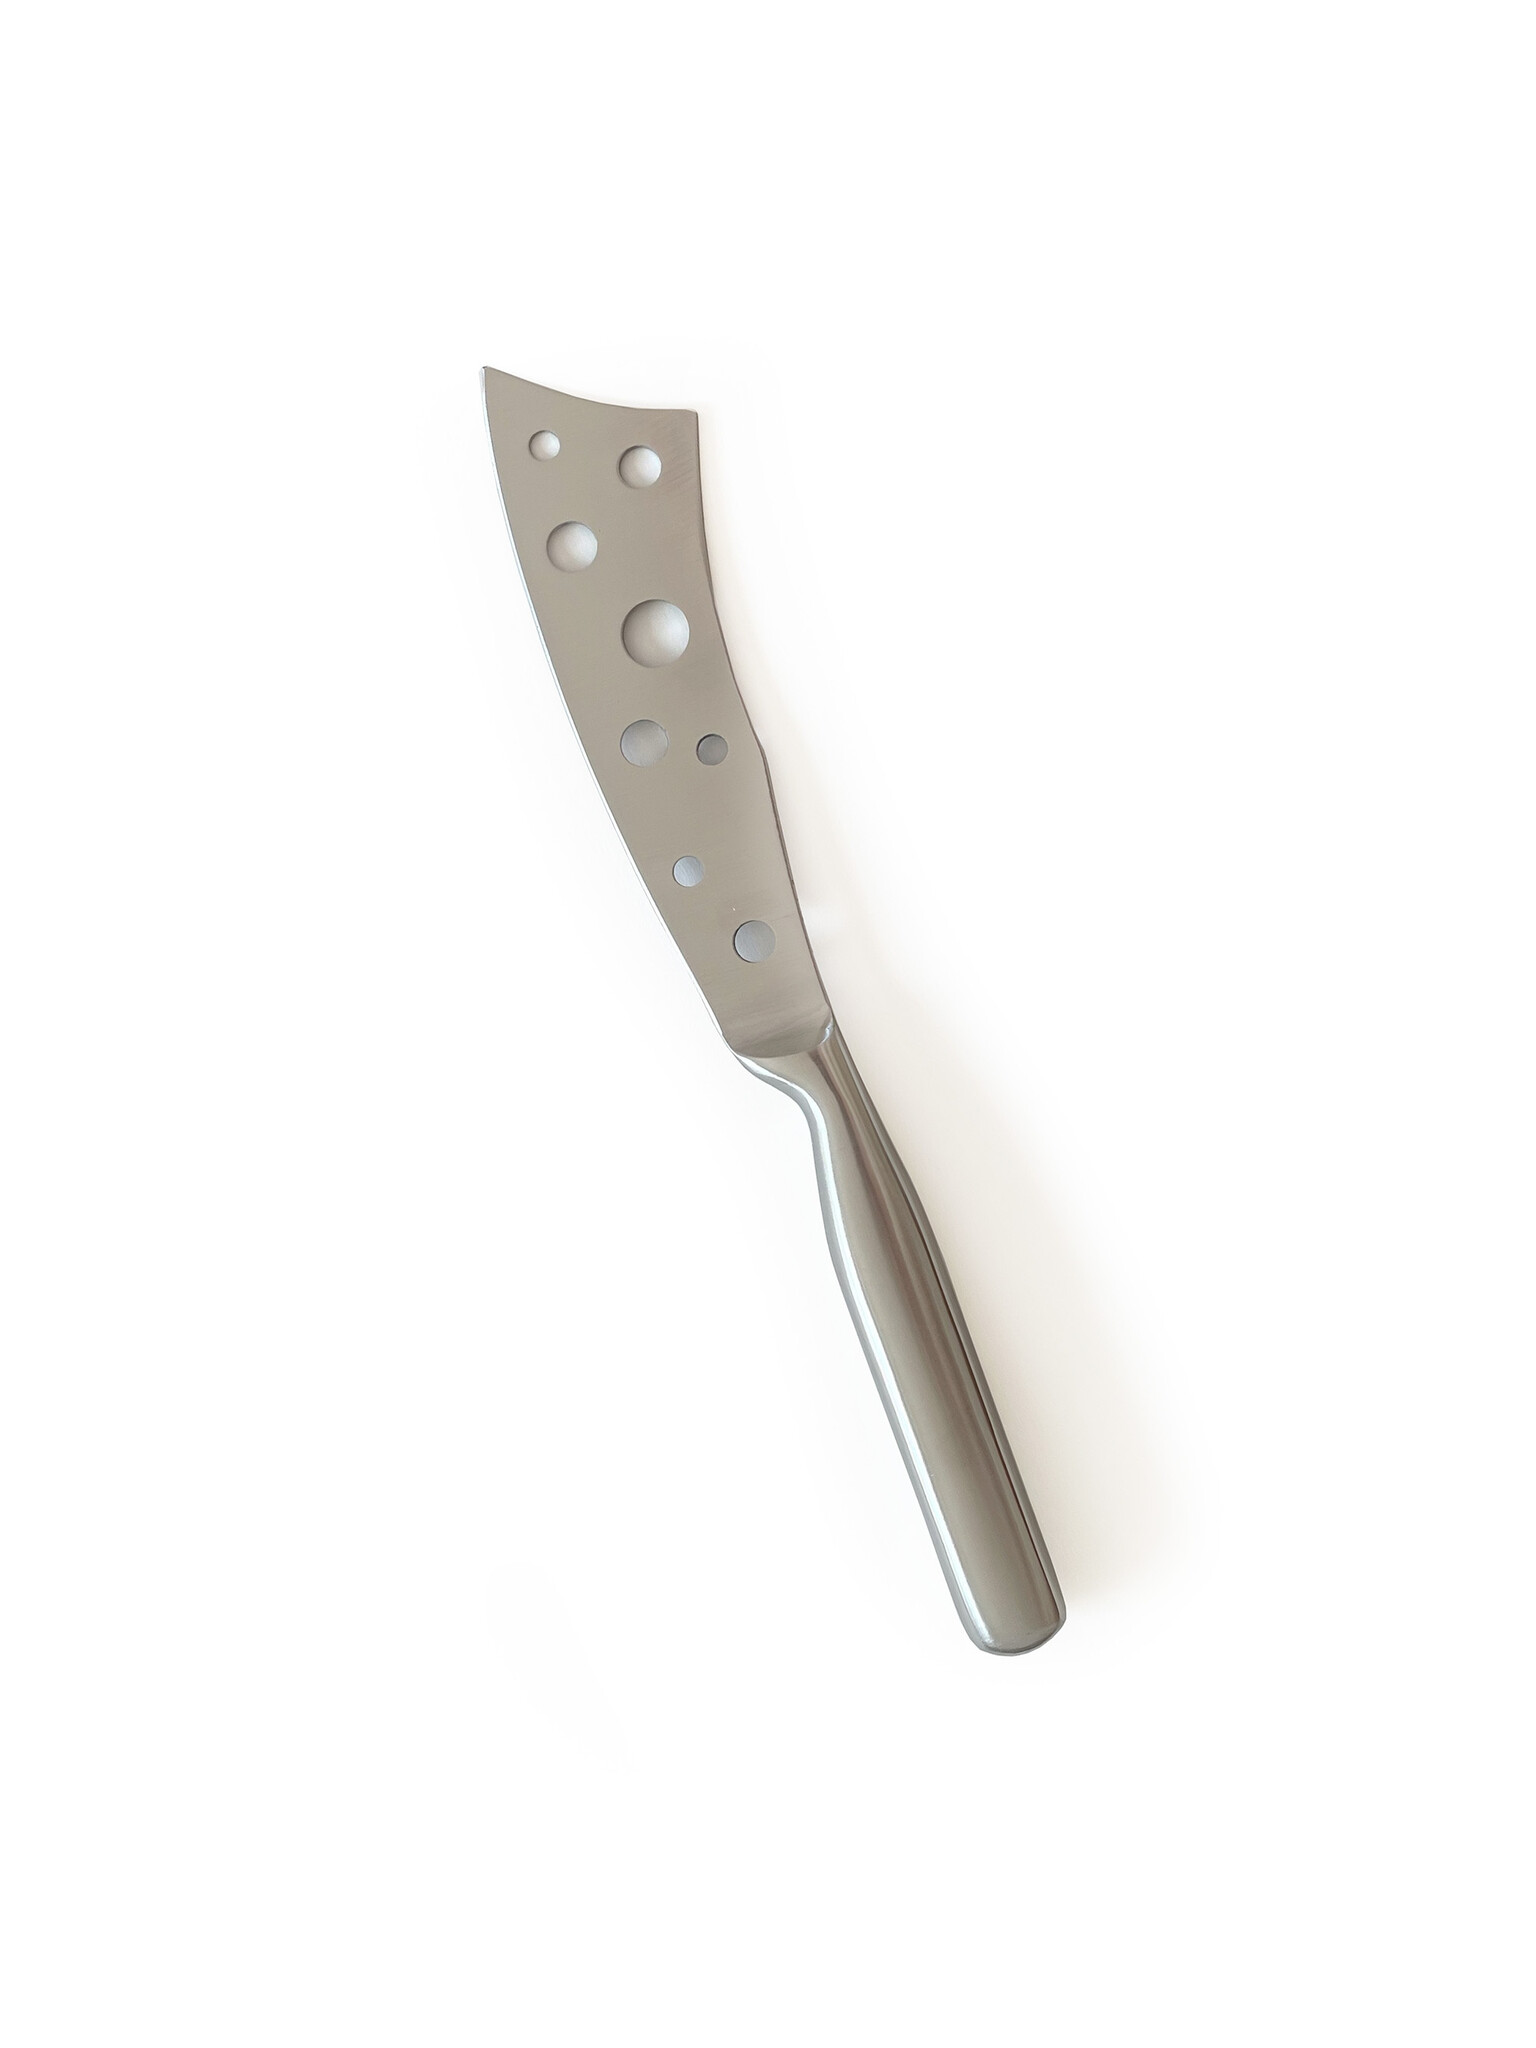 Spread butter and jams like a pro with this stainless steel spreader k –